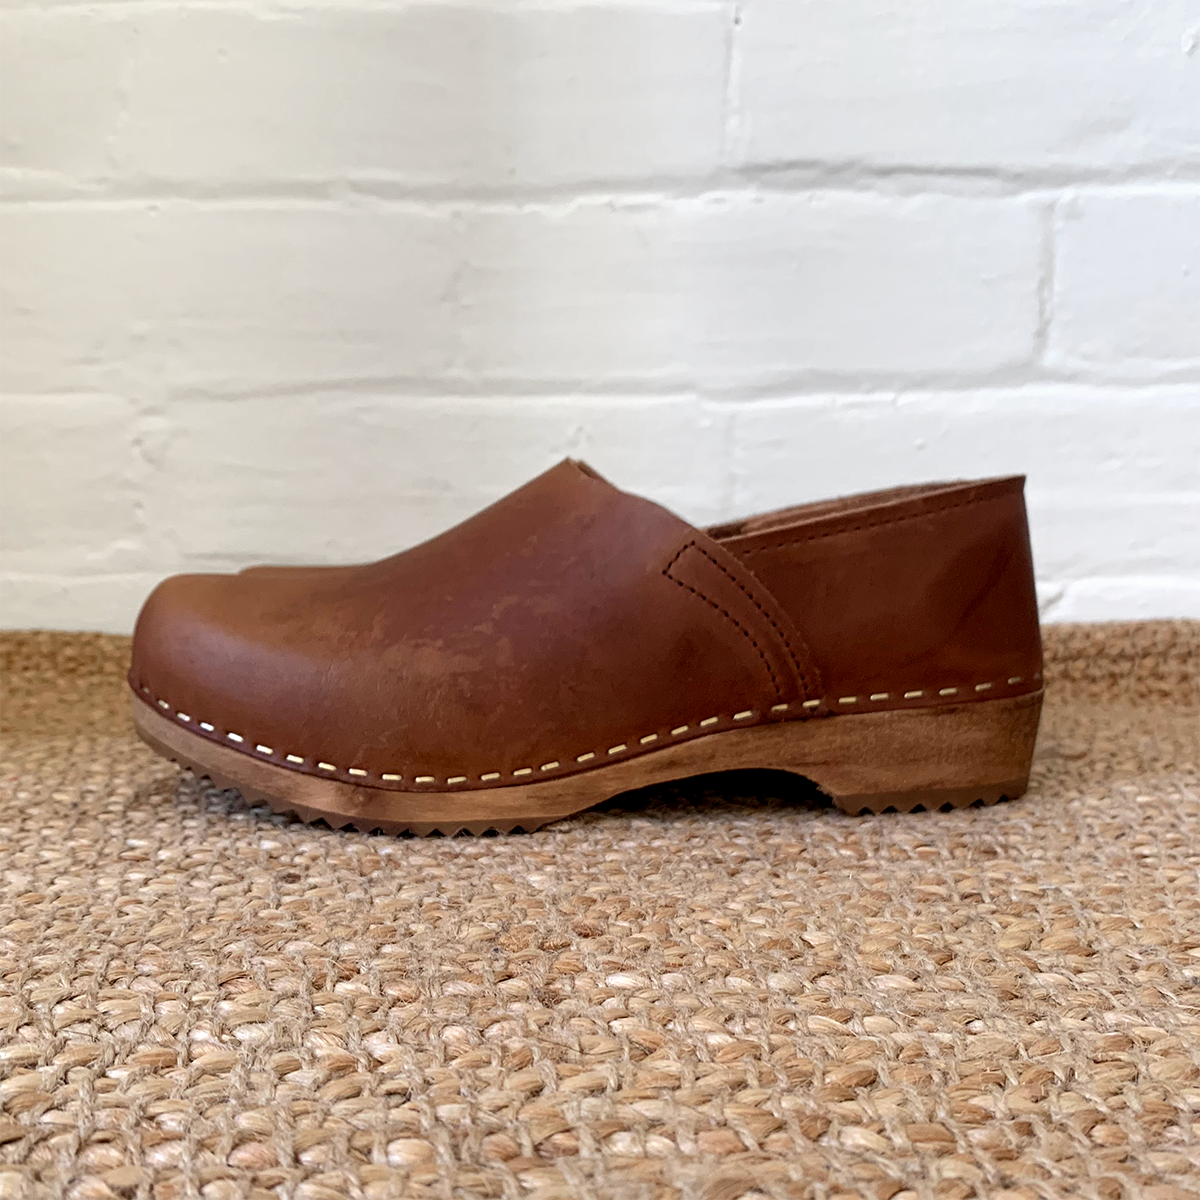 Cacao low klassisk classic mule swedish clogs with a covered back